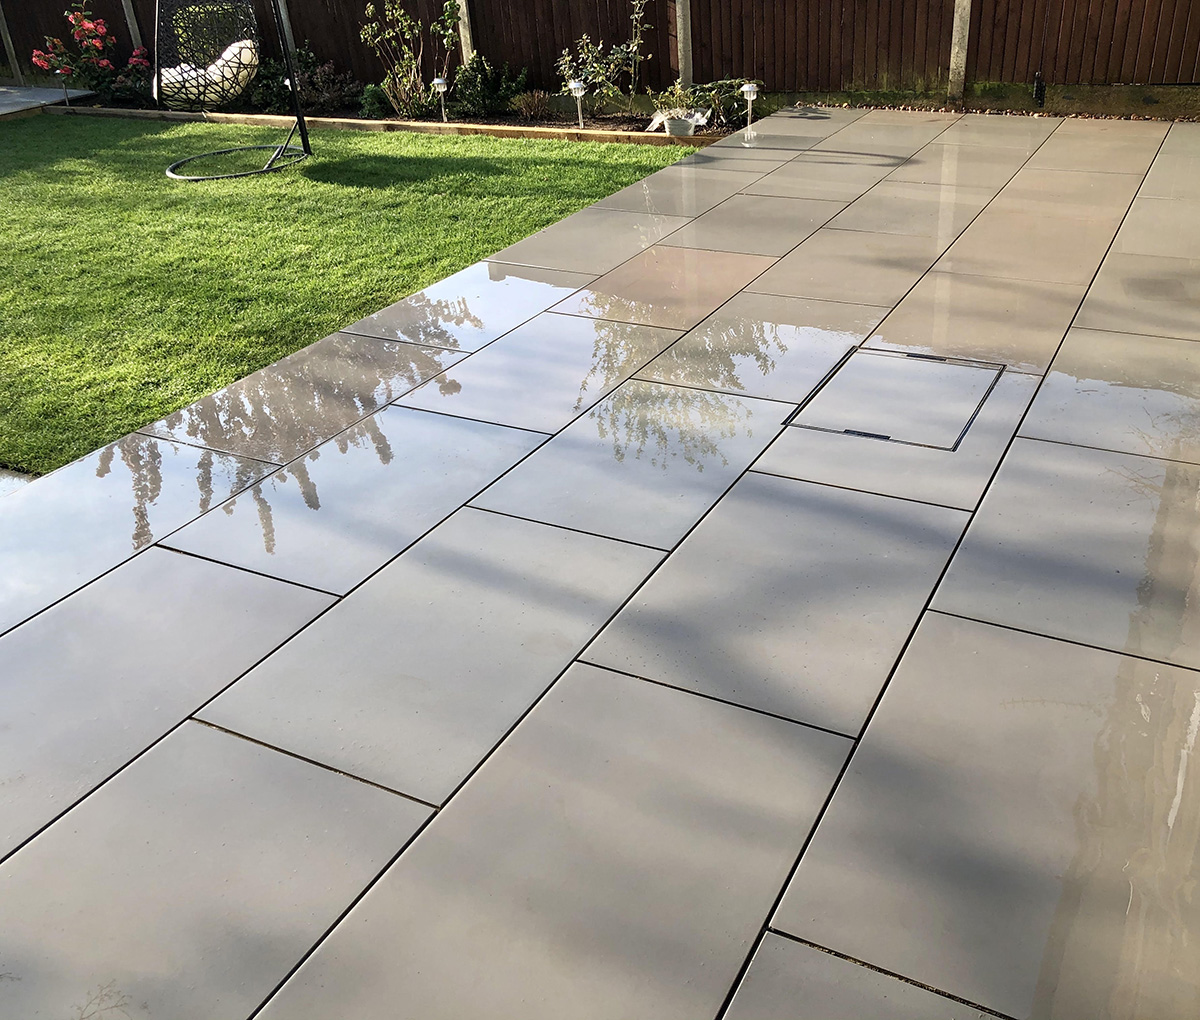 Kandla Grey Indian Stone Paving Slabs, What Can I Use Instead Of Patio Slabs